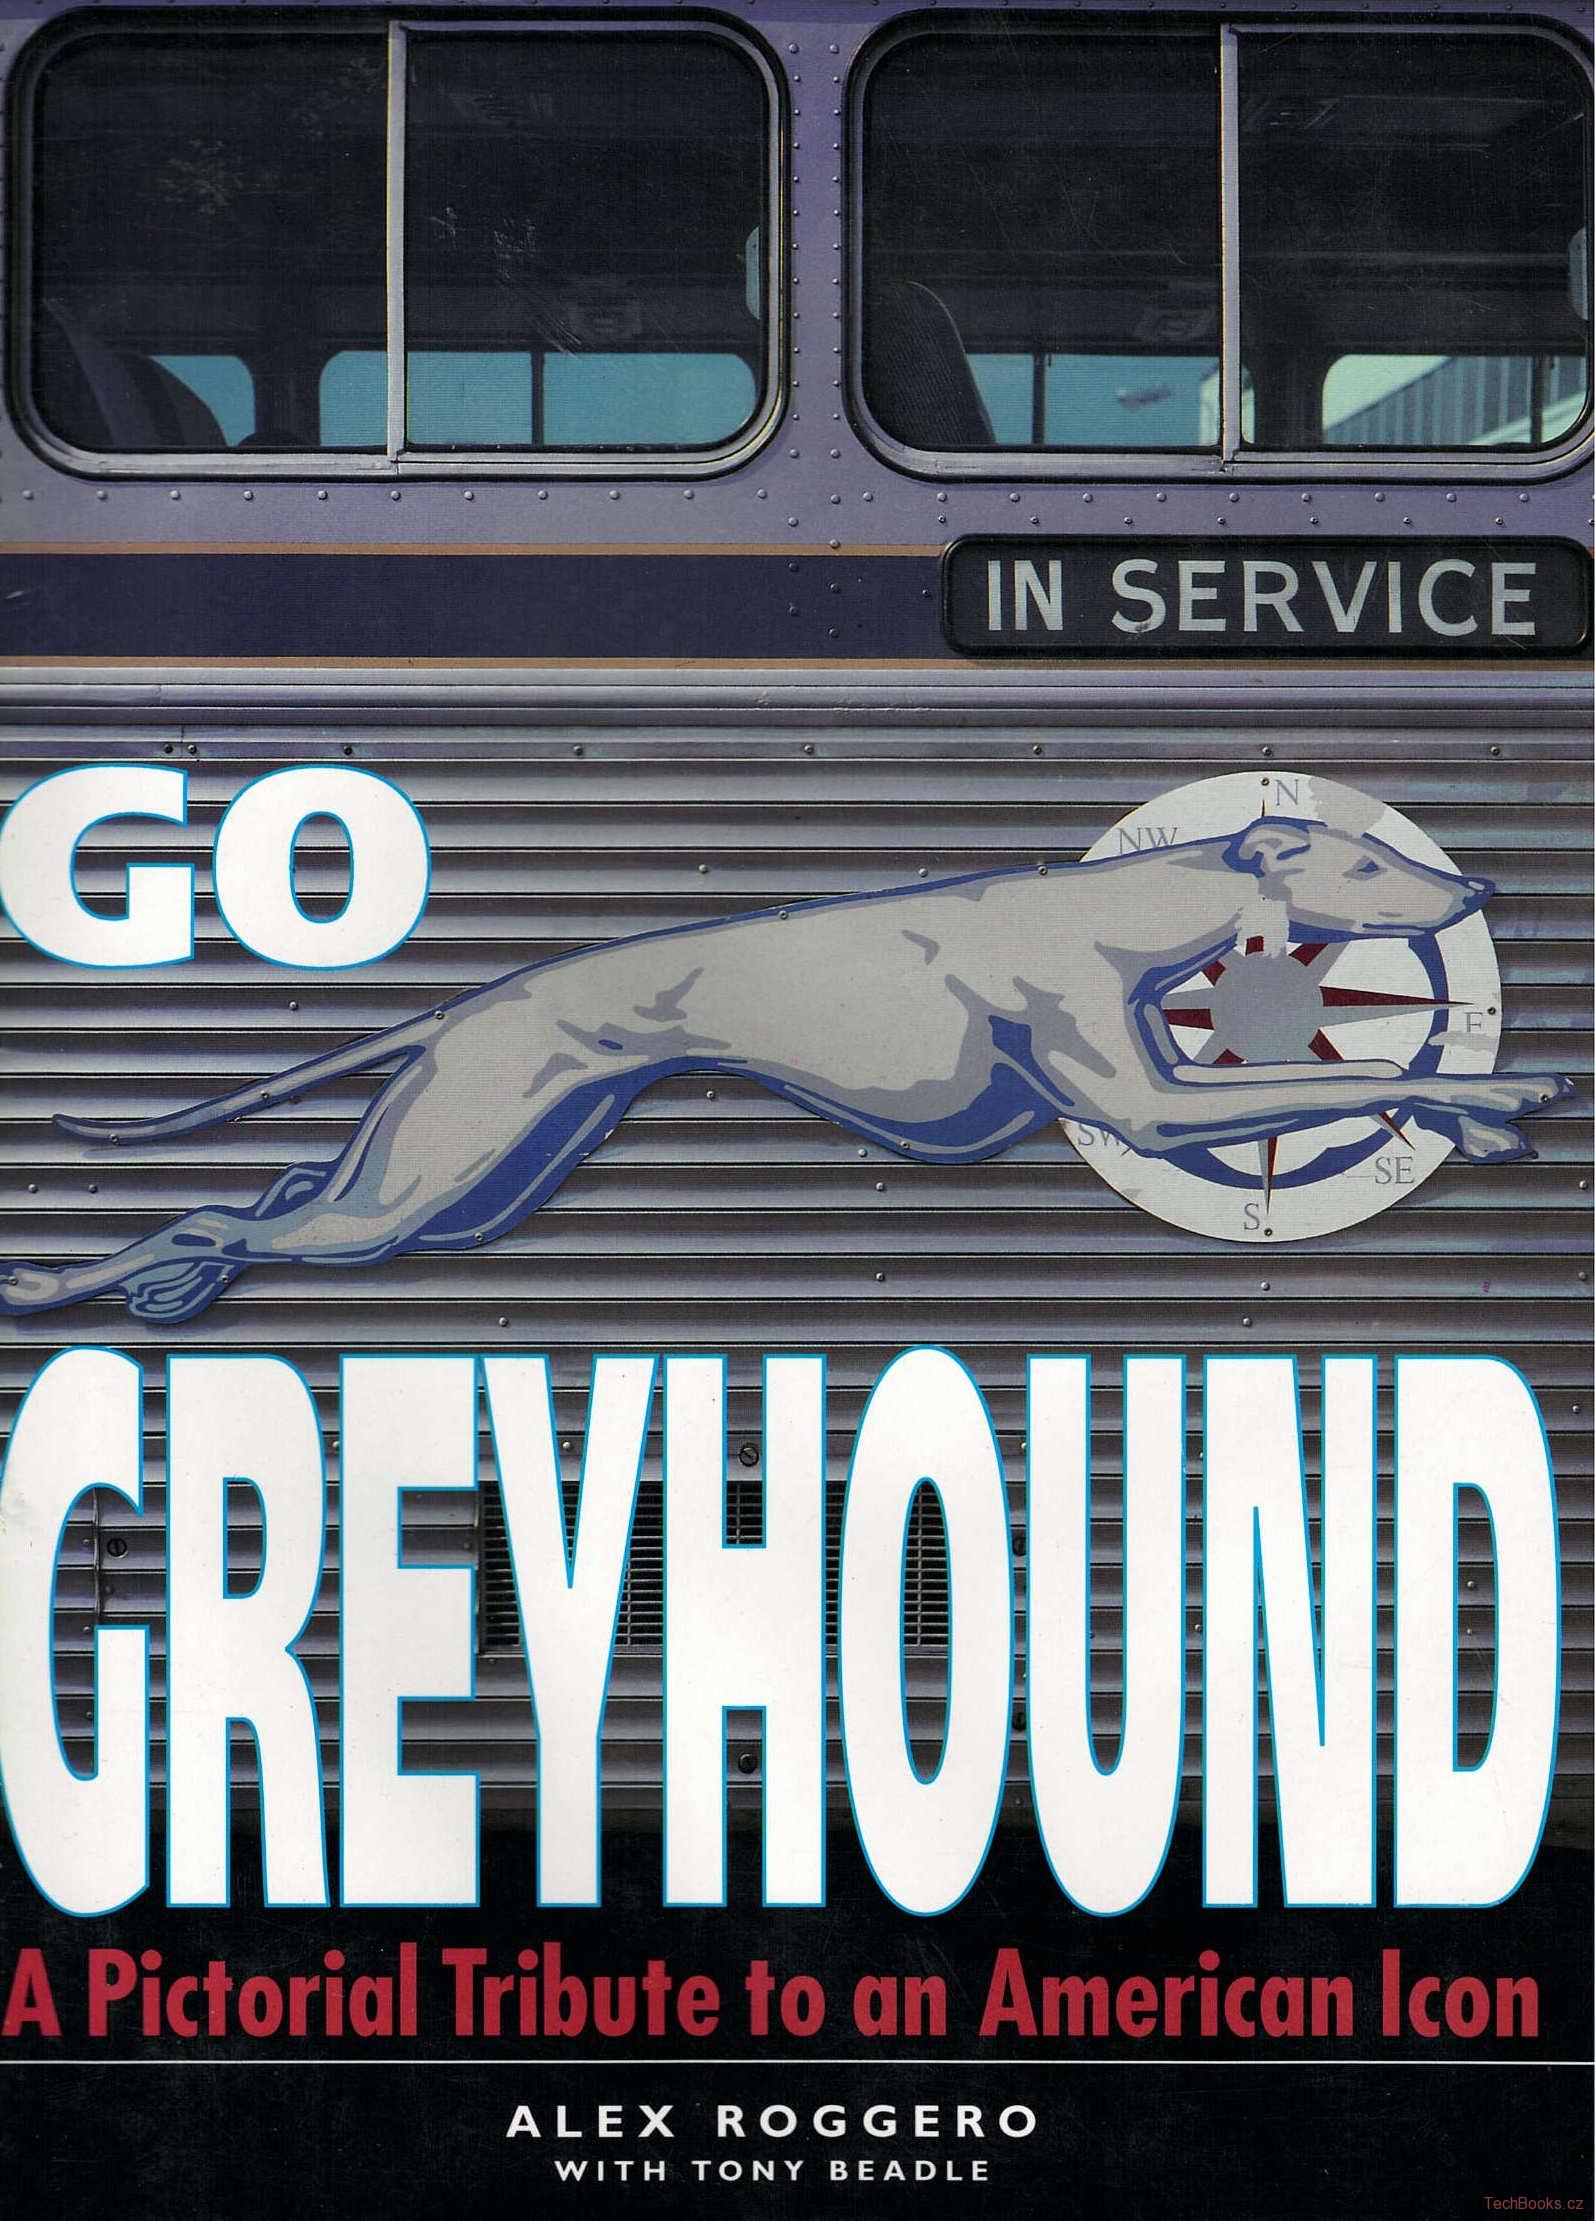 Go Greyhound - A Pictorial Tribute to an American Icon